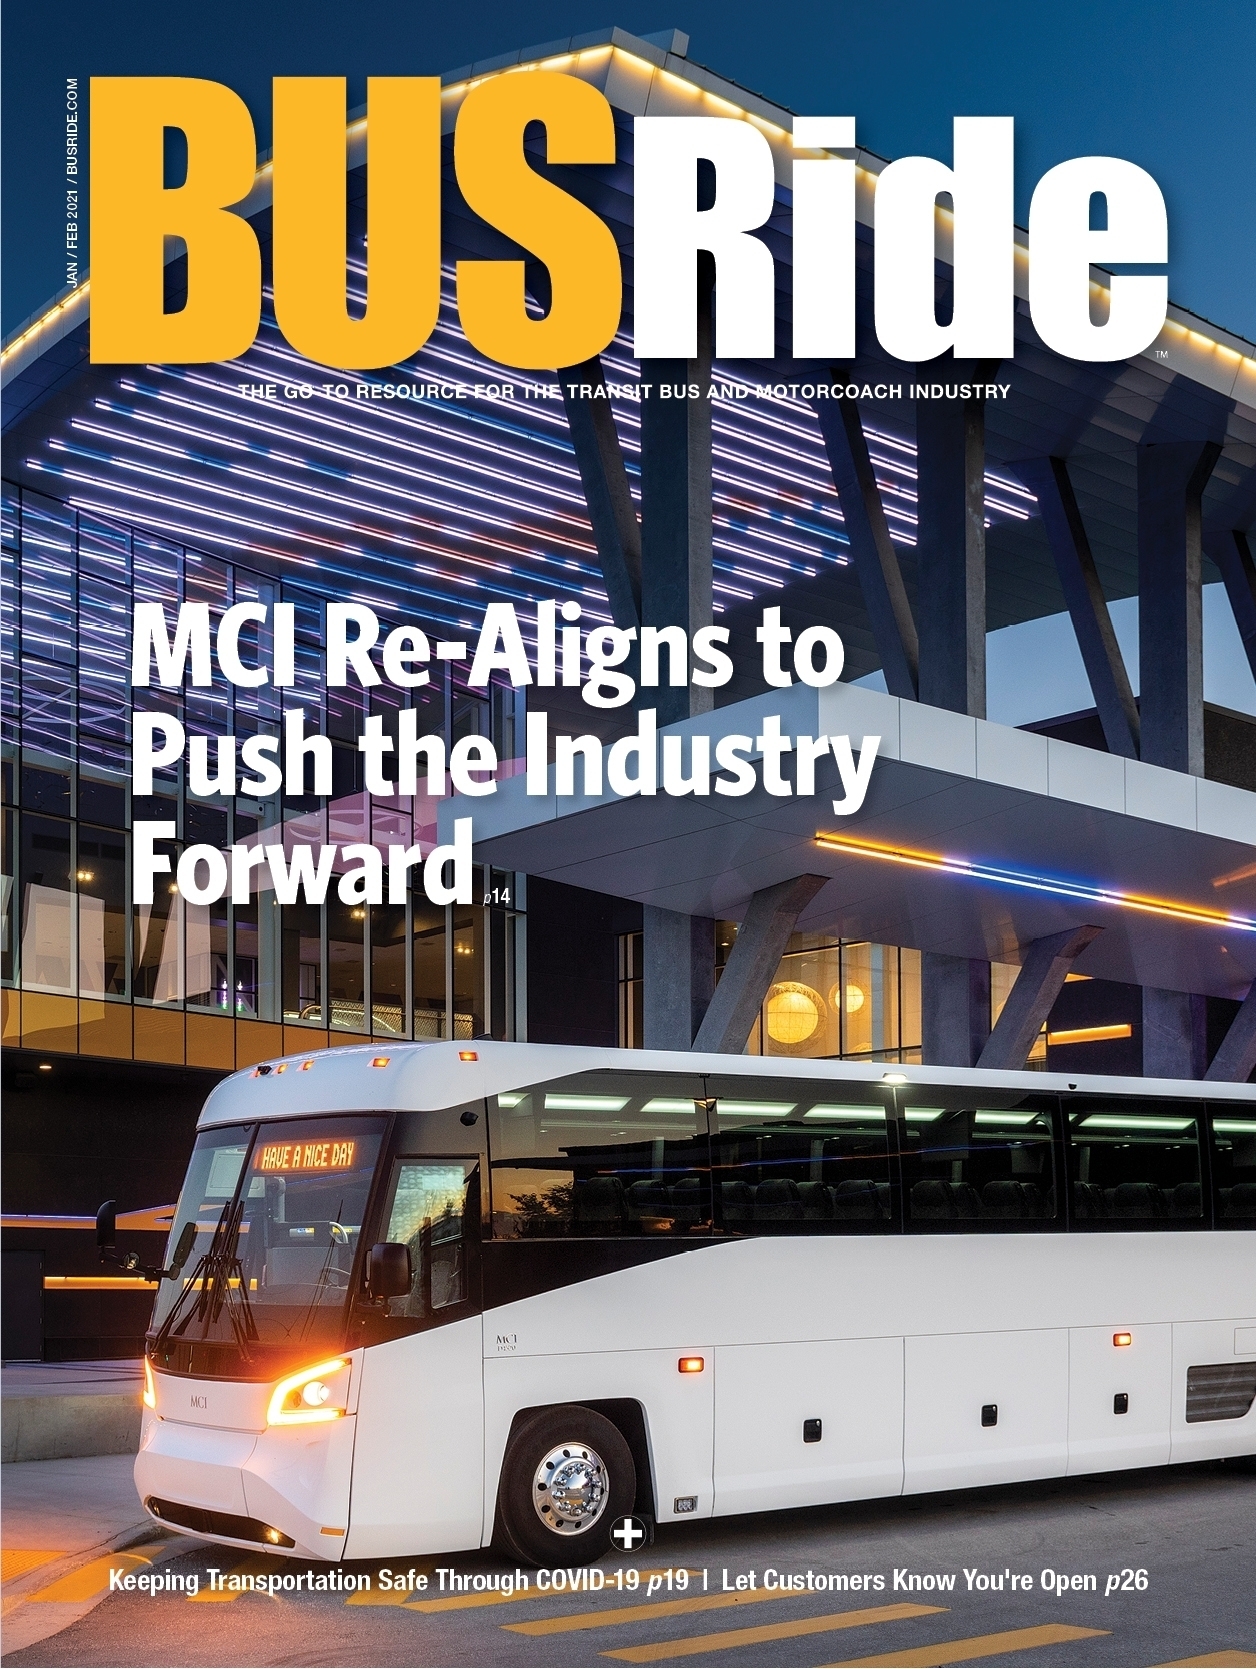 MCI Re-Aligns to Push Industry Forward